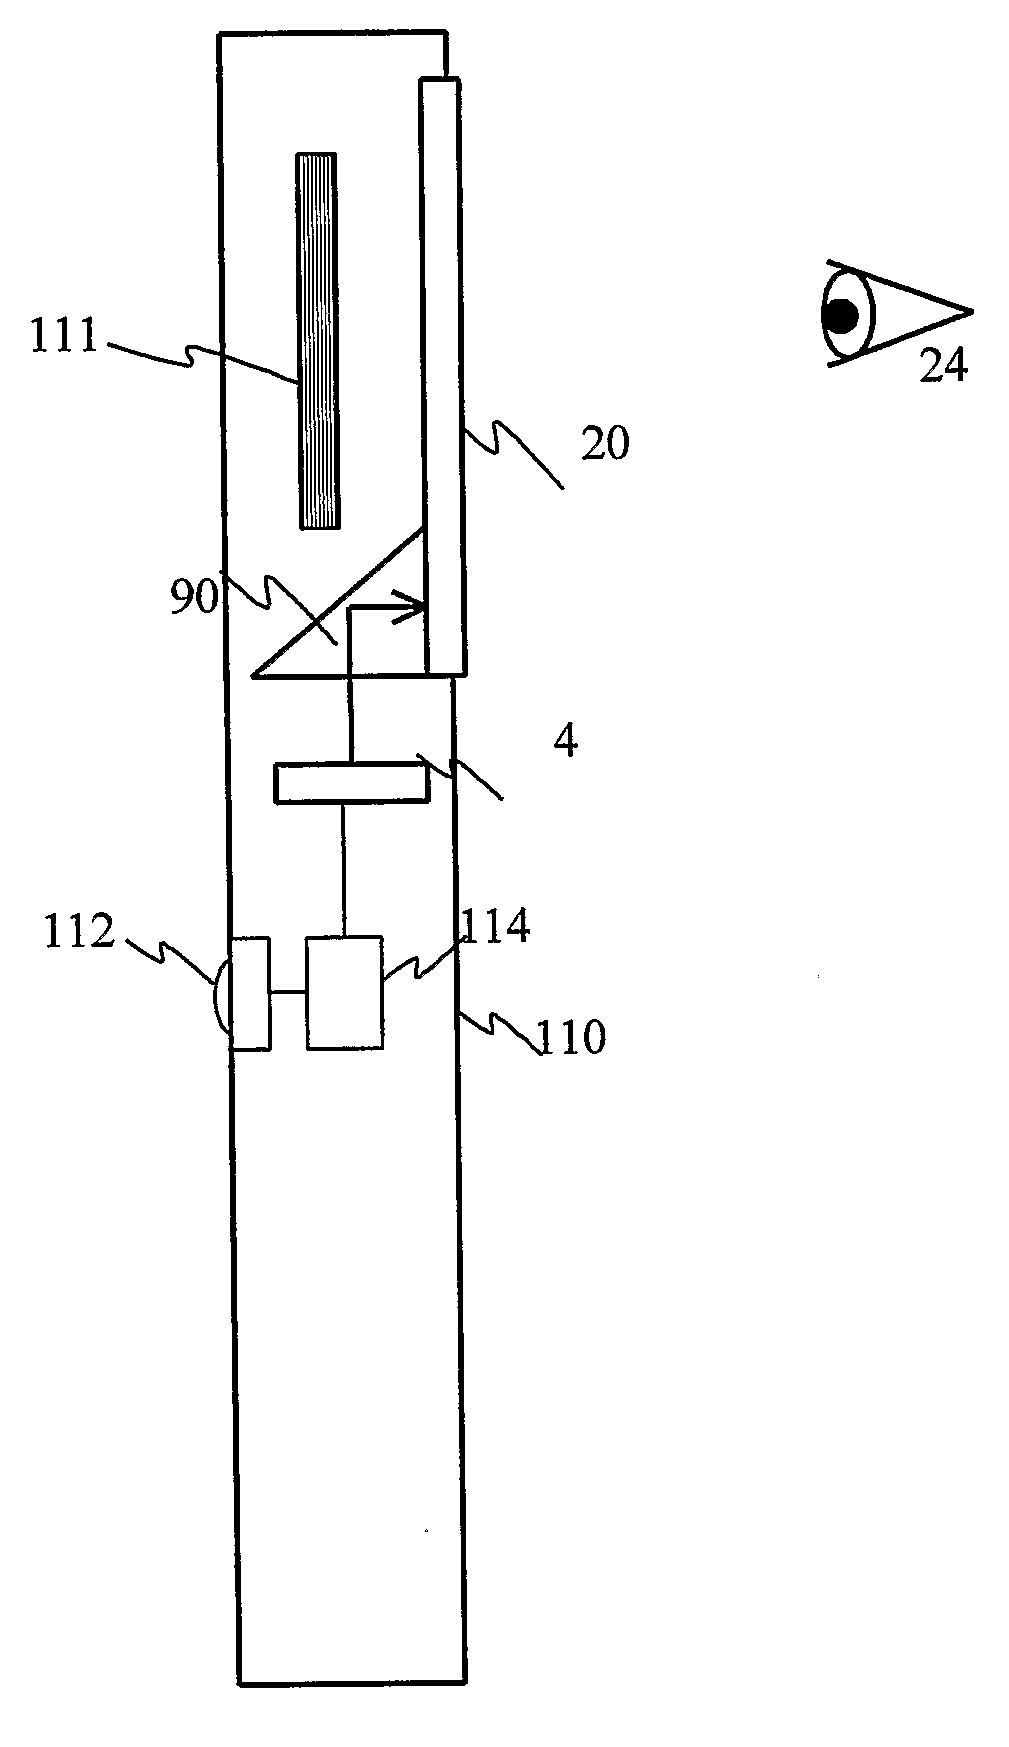 Substrate-Guided Optical Device Particularly for Vision Enhanced Optical Systems